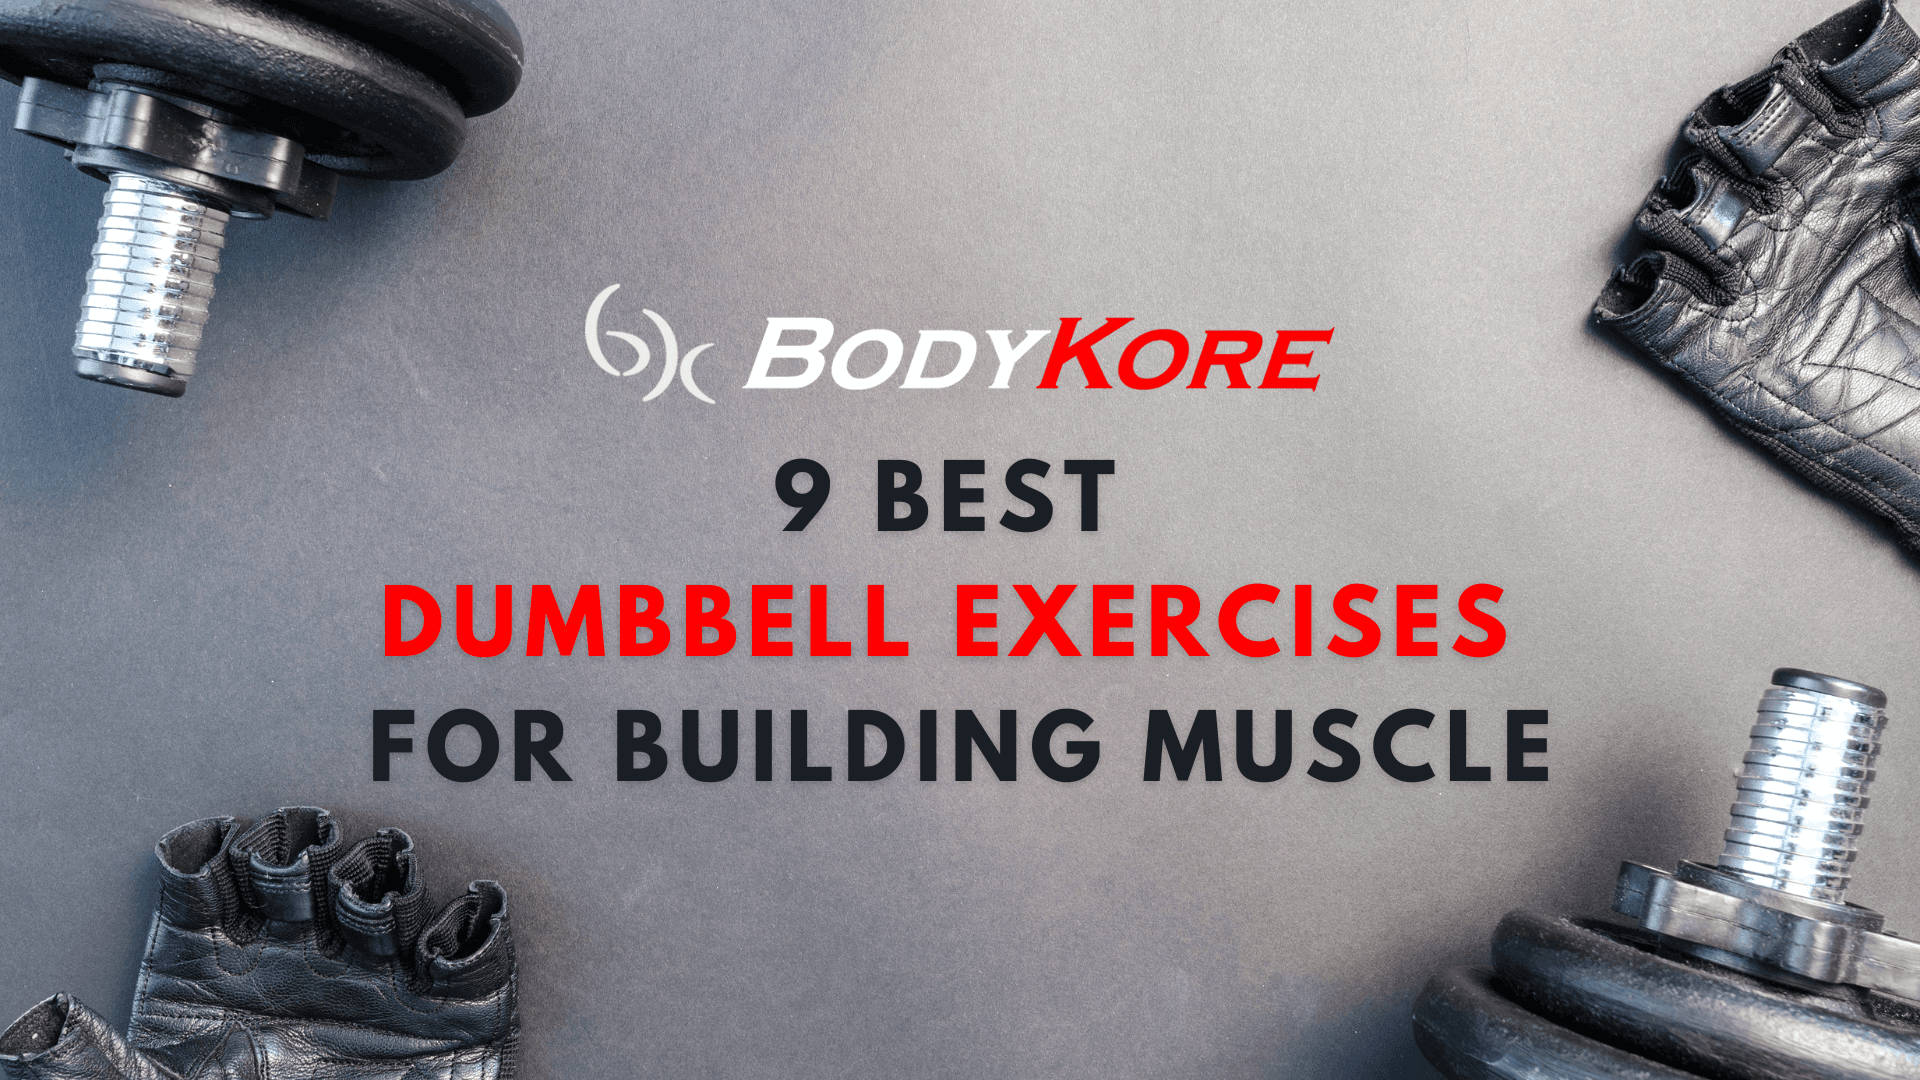 9 Best Dumbbell Exercises For Building Muscle